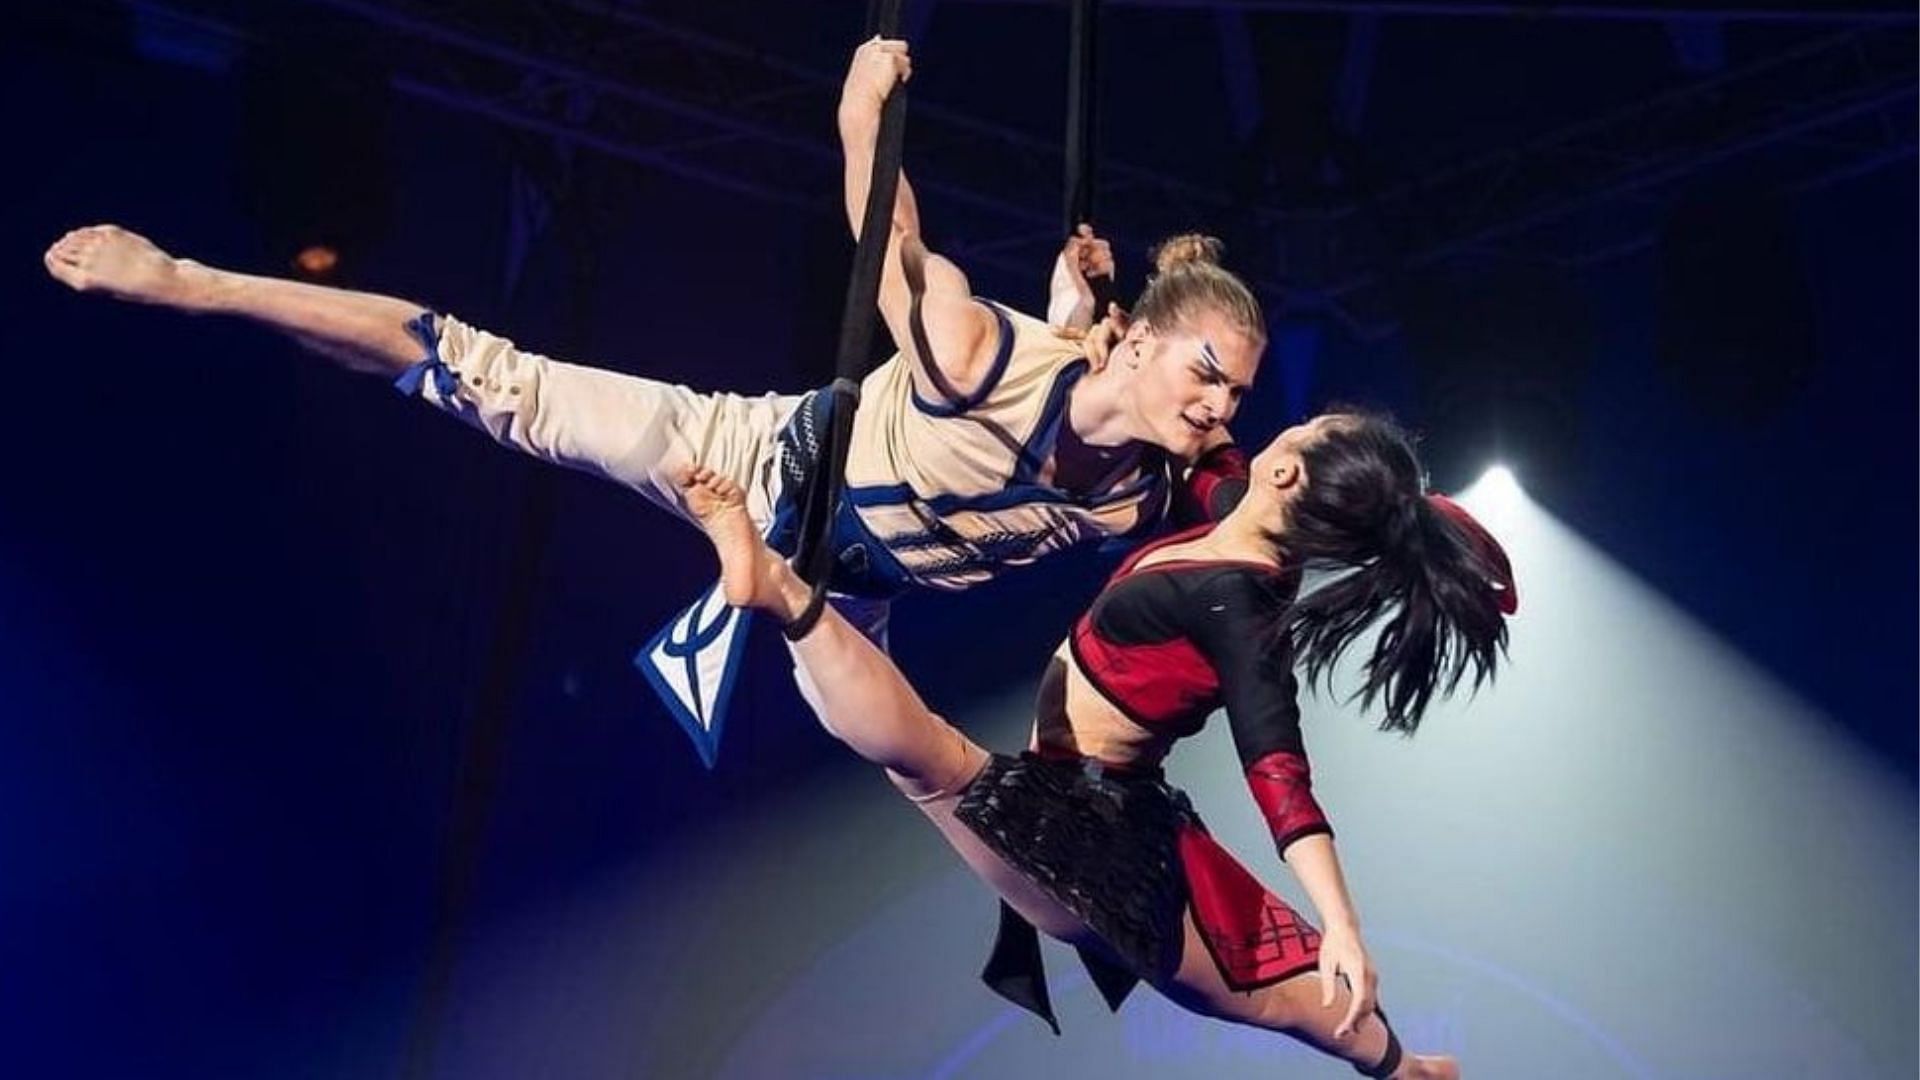 AGT aerial group Duo Mico stun the judges with their audition (Image via duomico/Instagram)